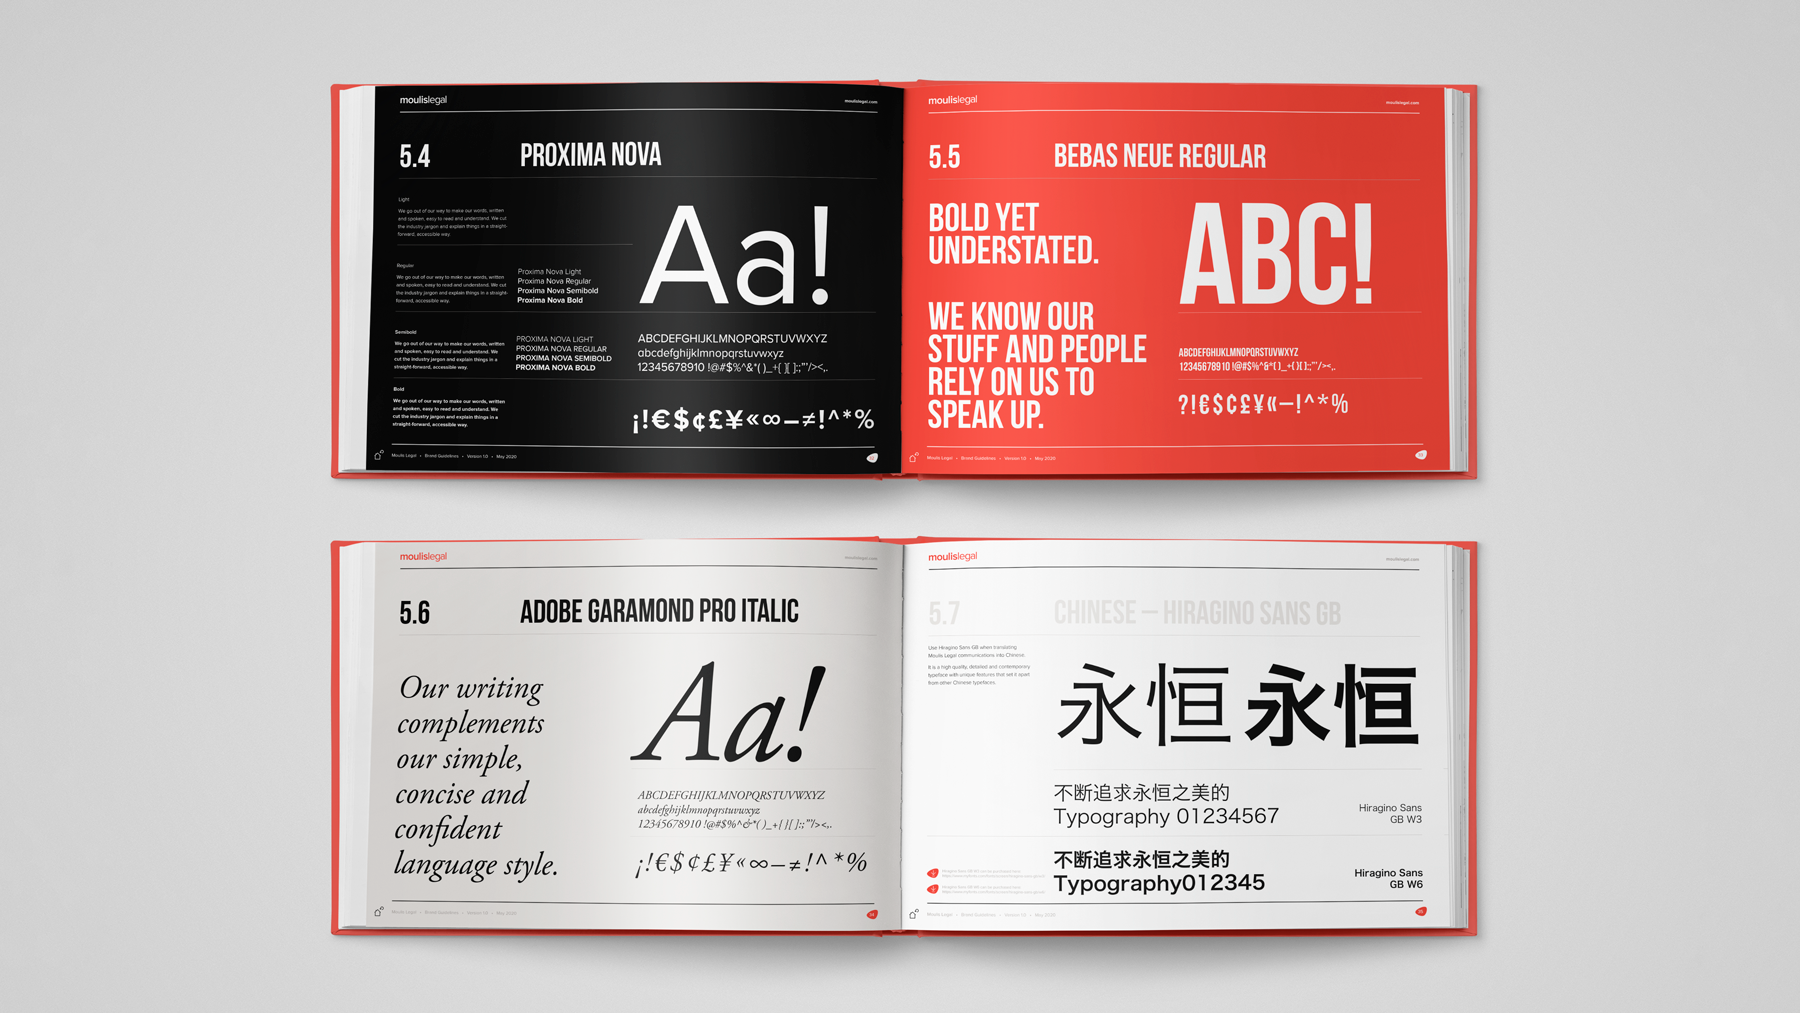 moulis-typography-extended-spread_16-9.png